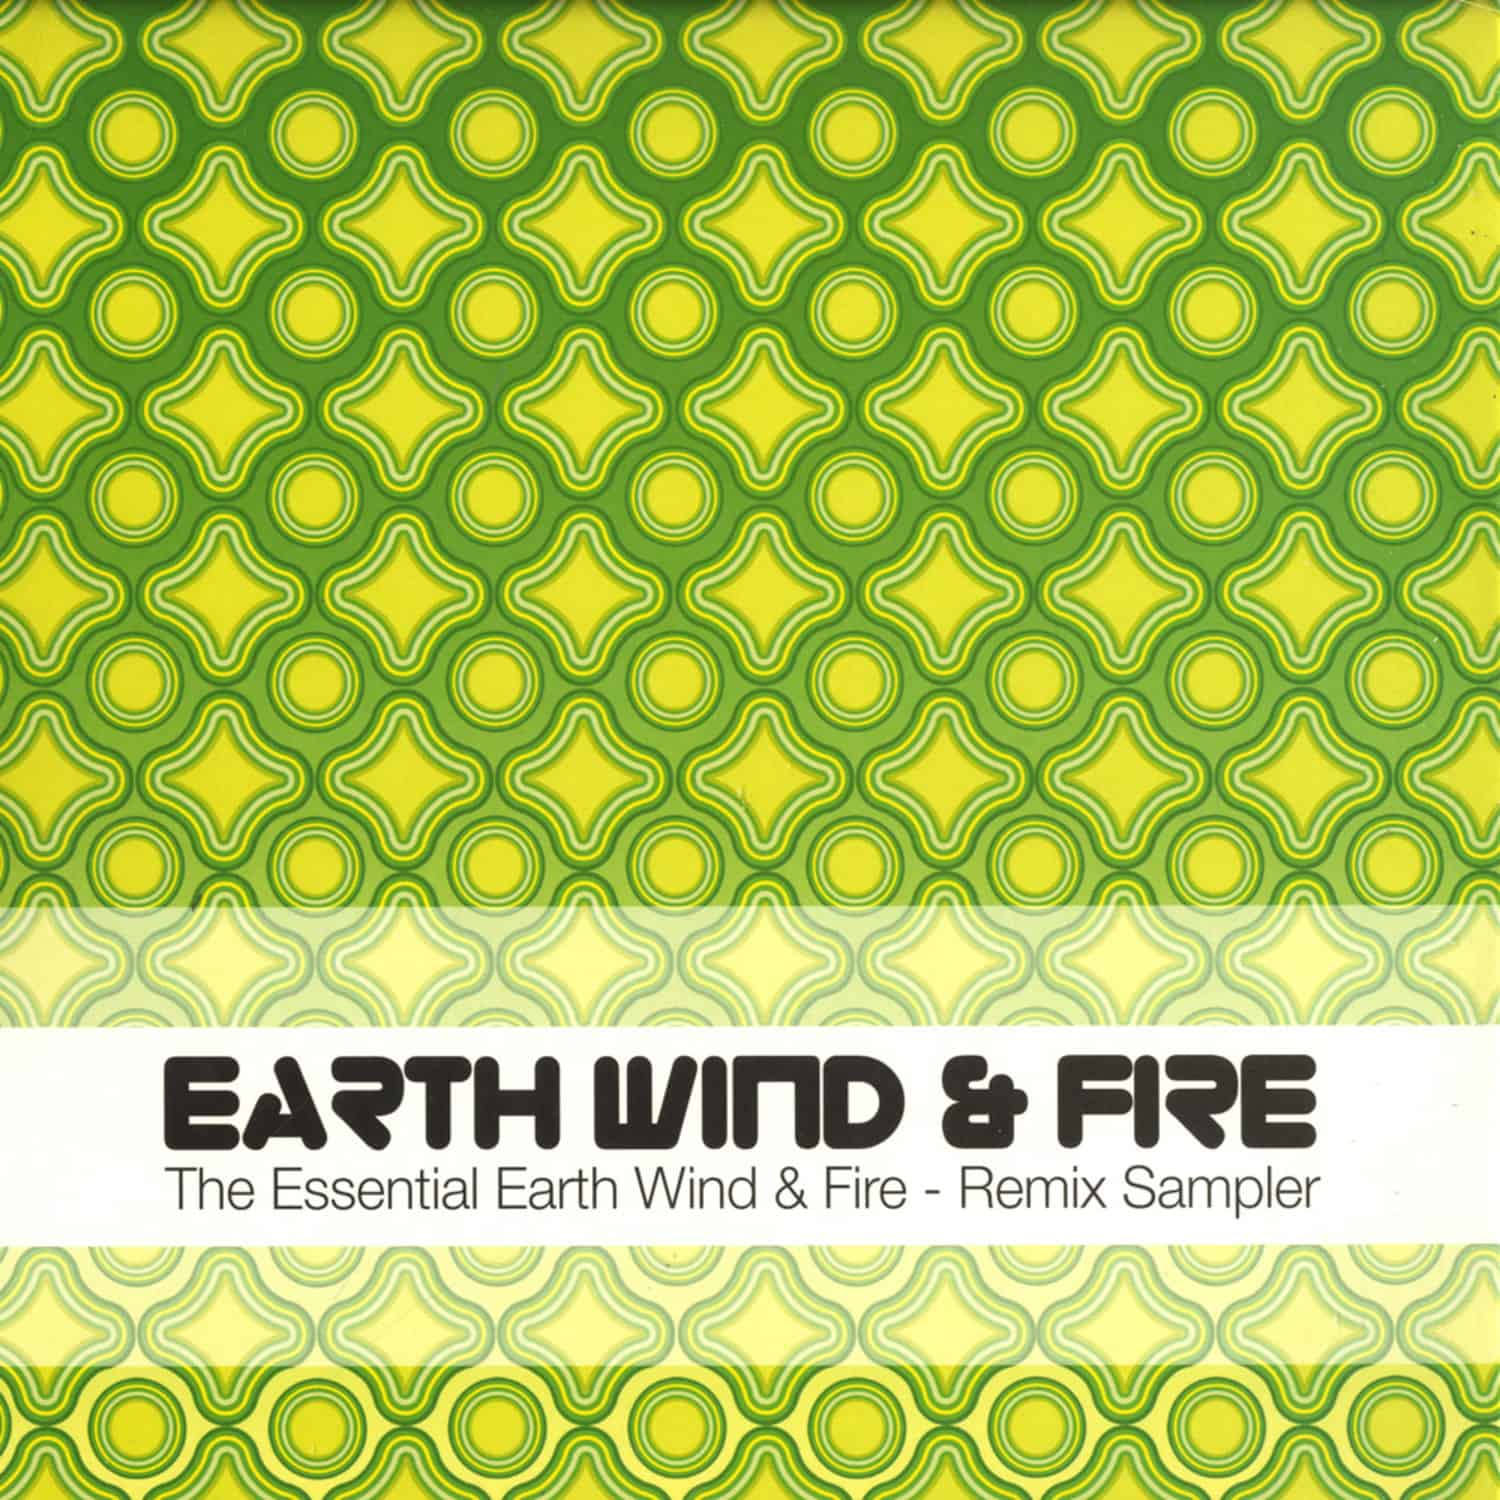 Earth Wind & Fire - THE ESSENTIAL EARTH WIND & FIRE - Remix Sampler